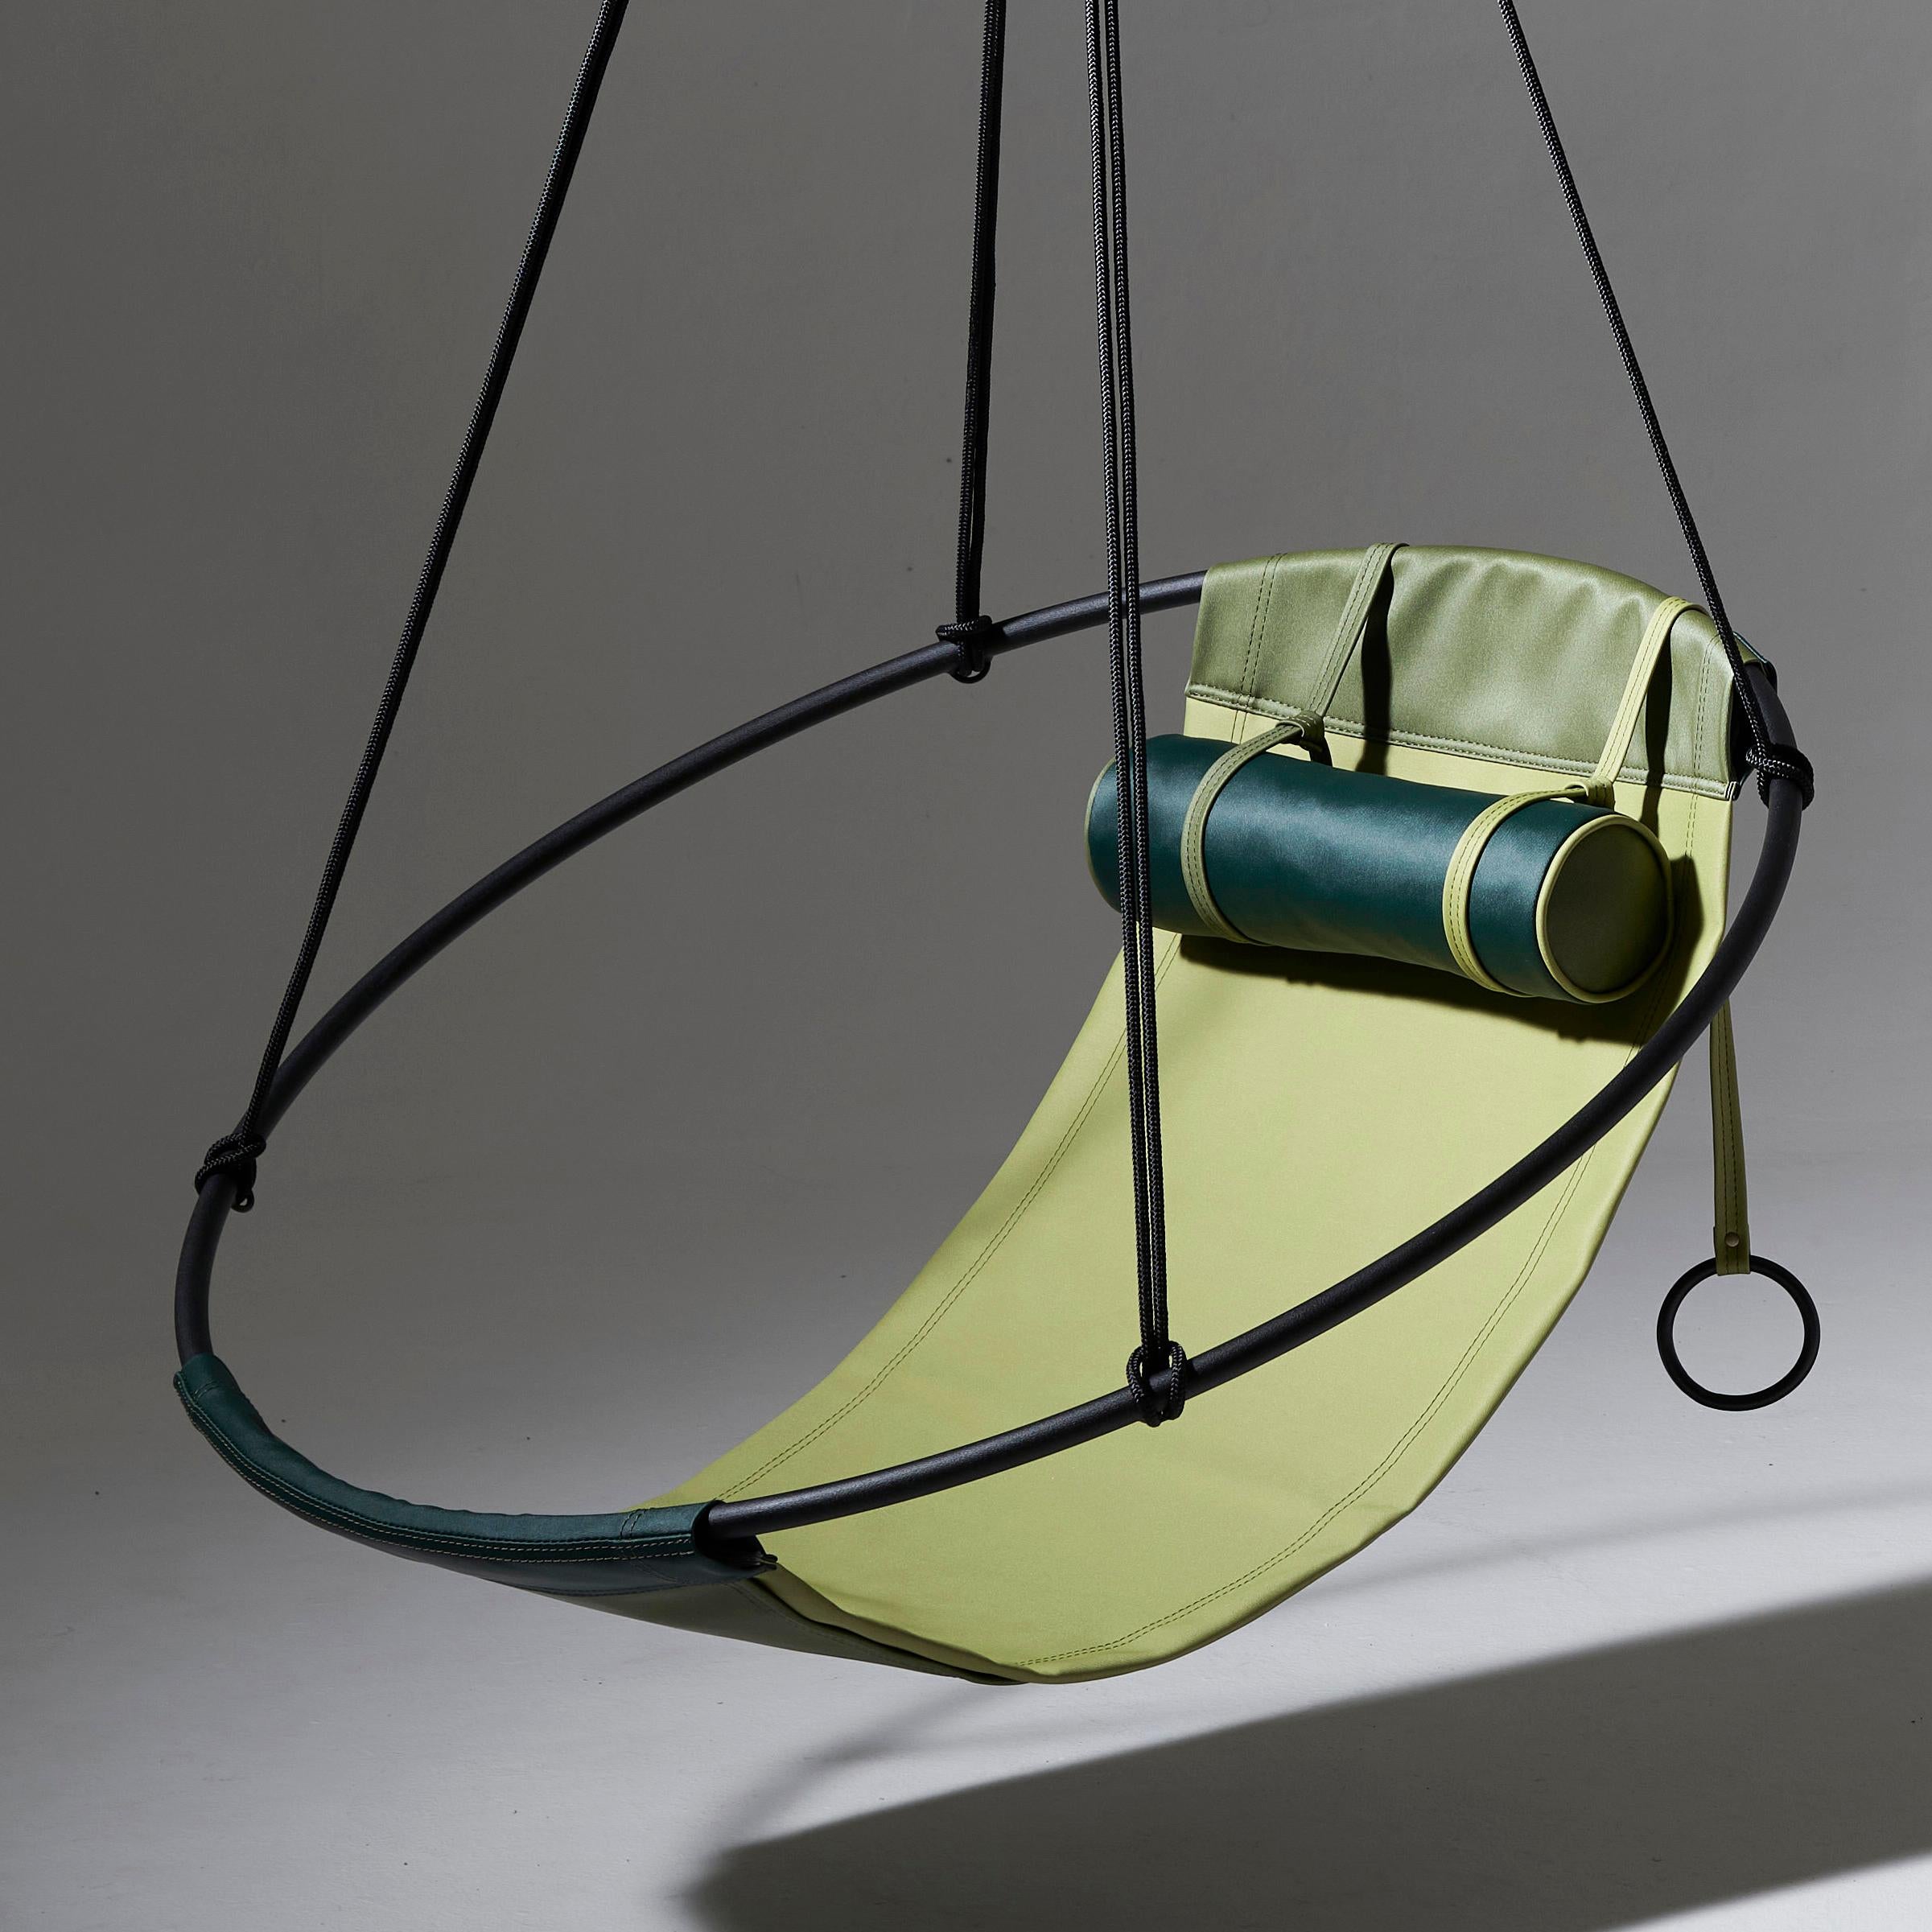 Our Sling hanging chair which is crafted with Spradling Silvertex material – a highly-
sustainable environmentally-friendly vegan material.
The Slings can be ordered as a Single but also works together as a pair, which is slightly
different from